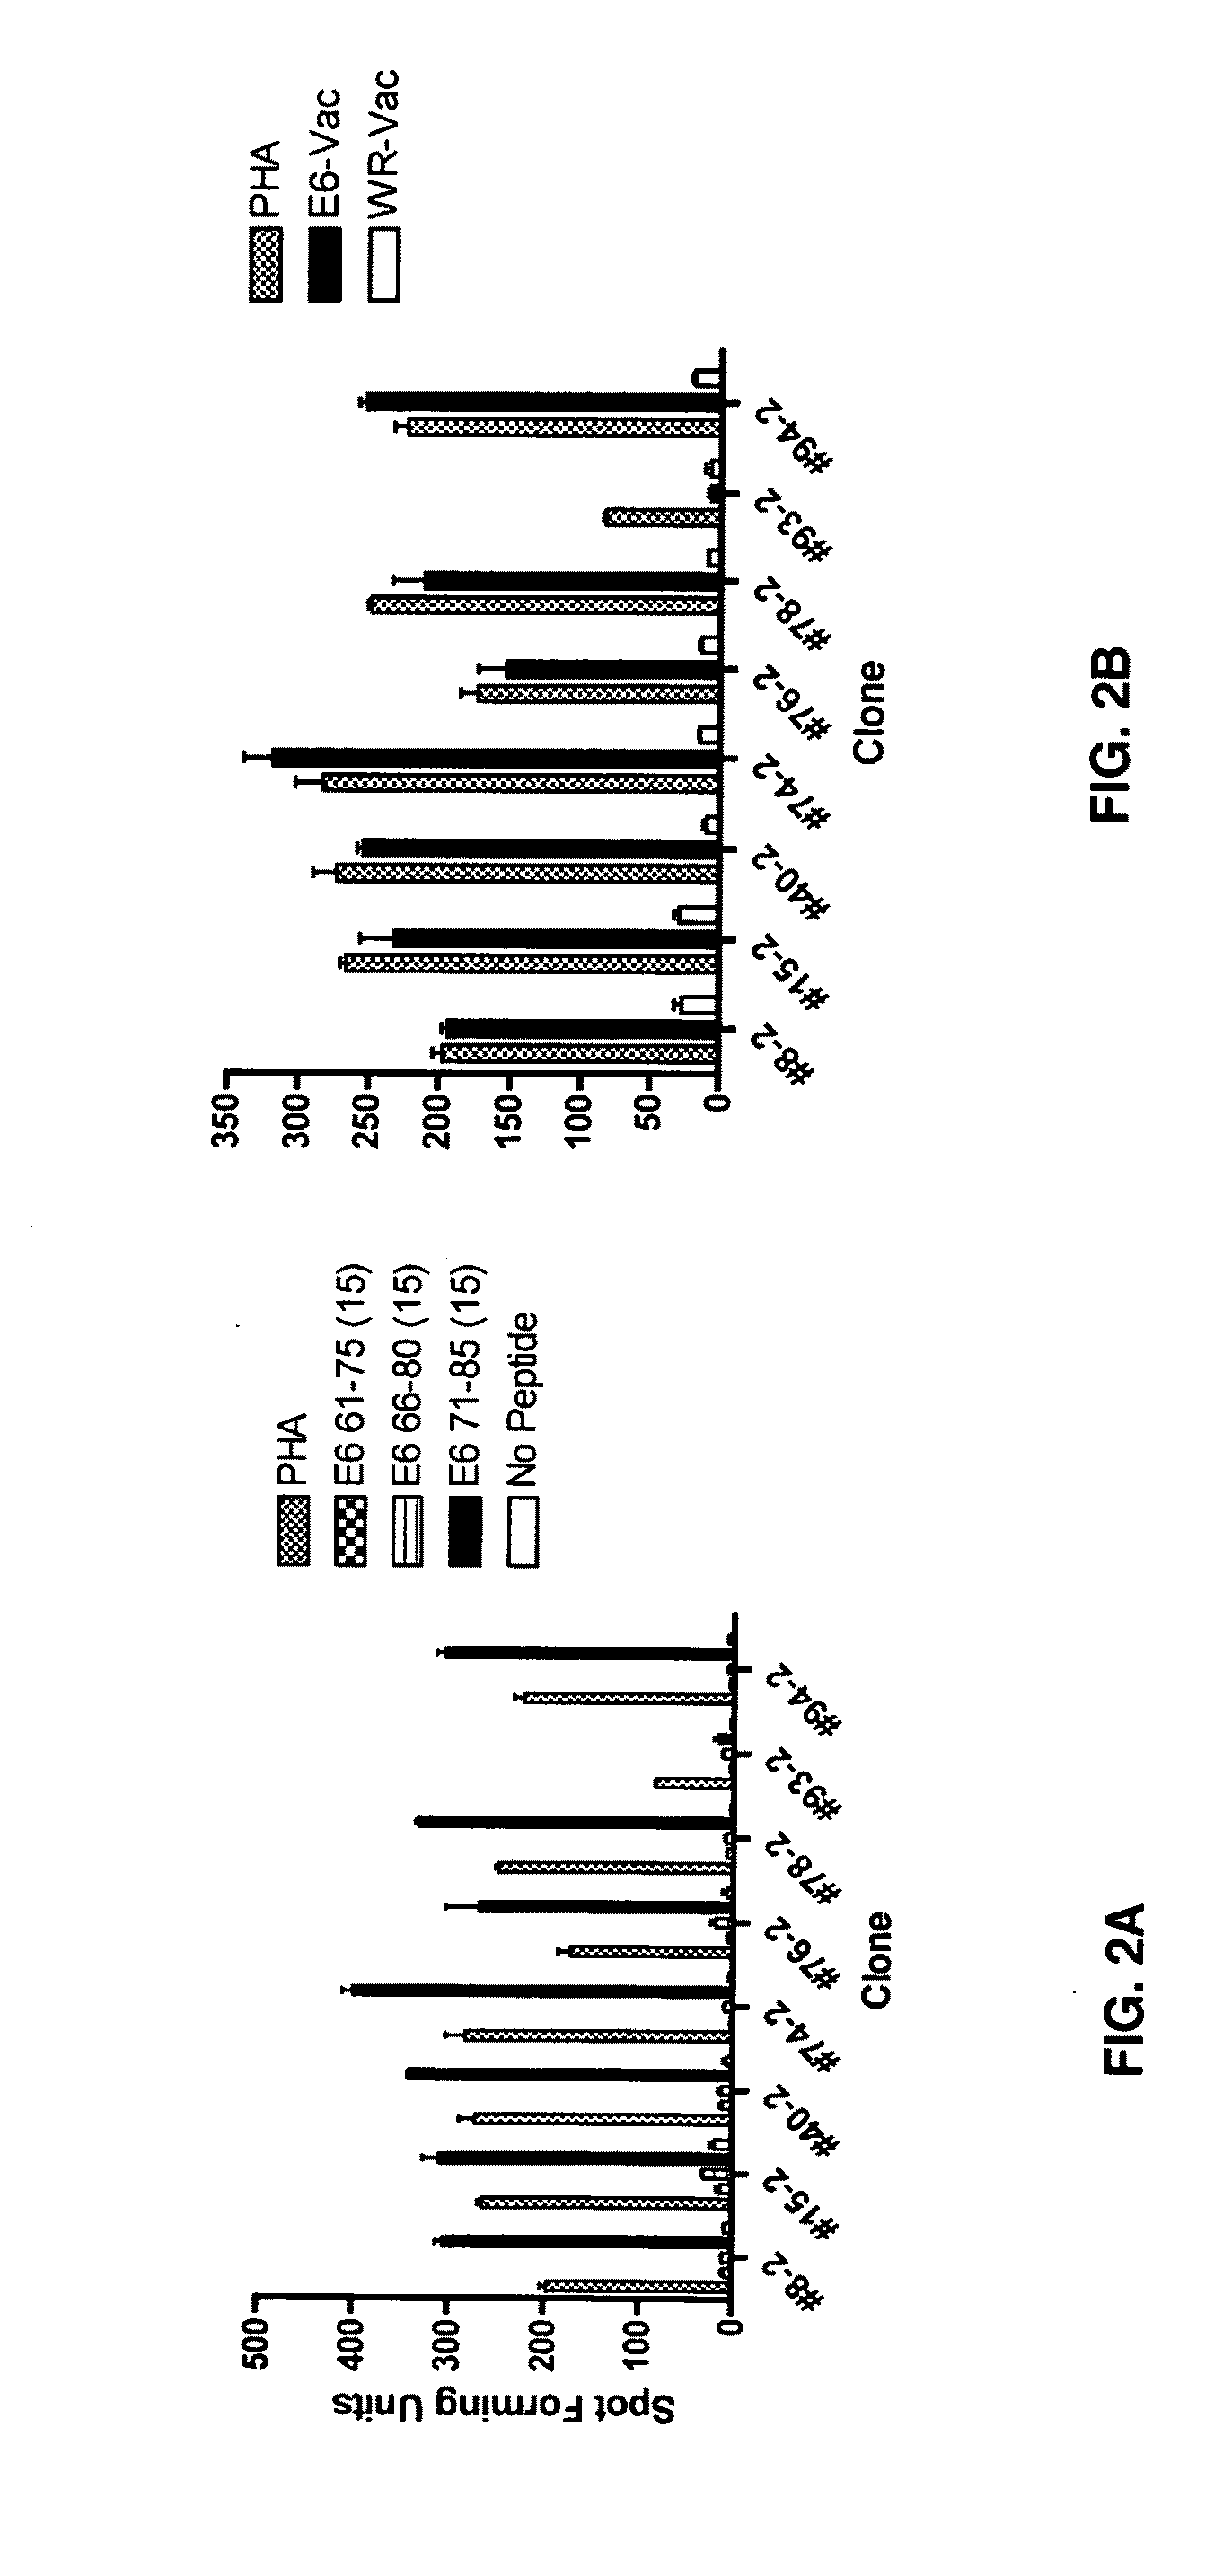 HPV E6 protein T cell epitopes and uses thereof